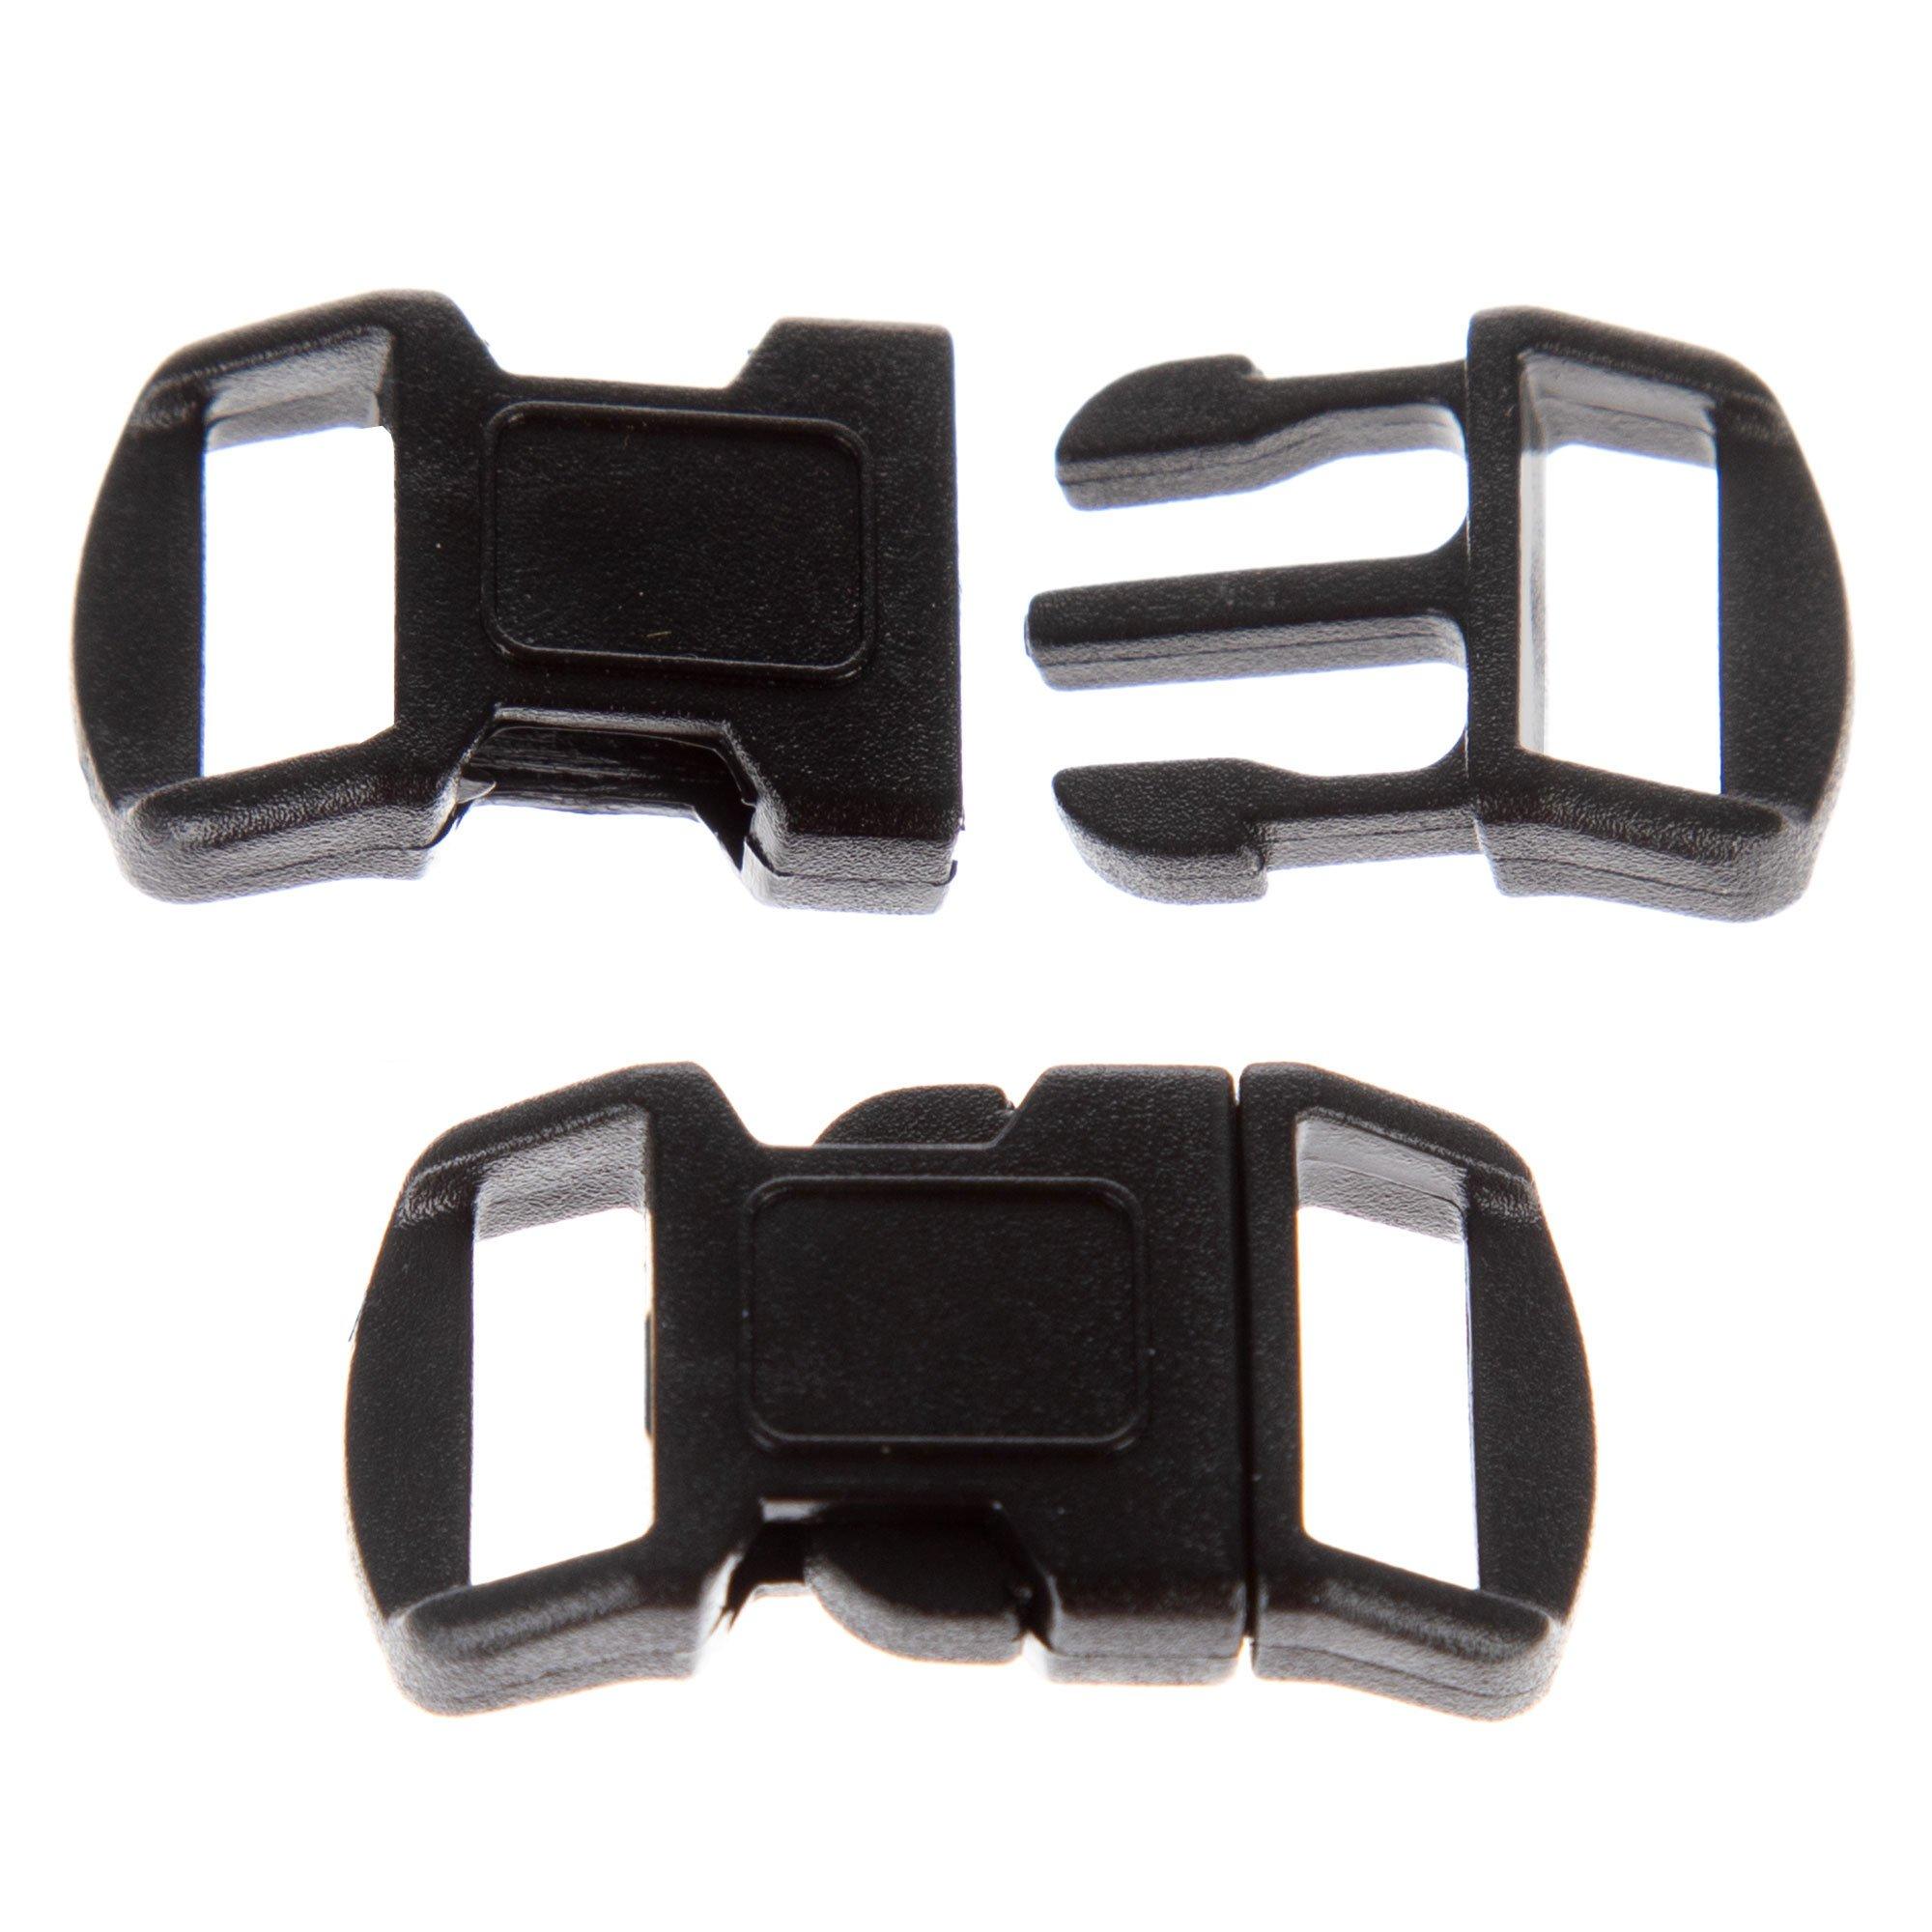 Paracord Buckles Quick Side Release Buckle Paracord Guinea